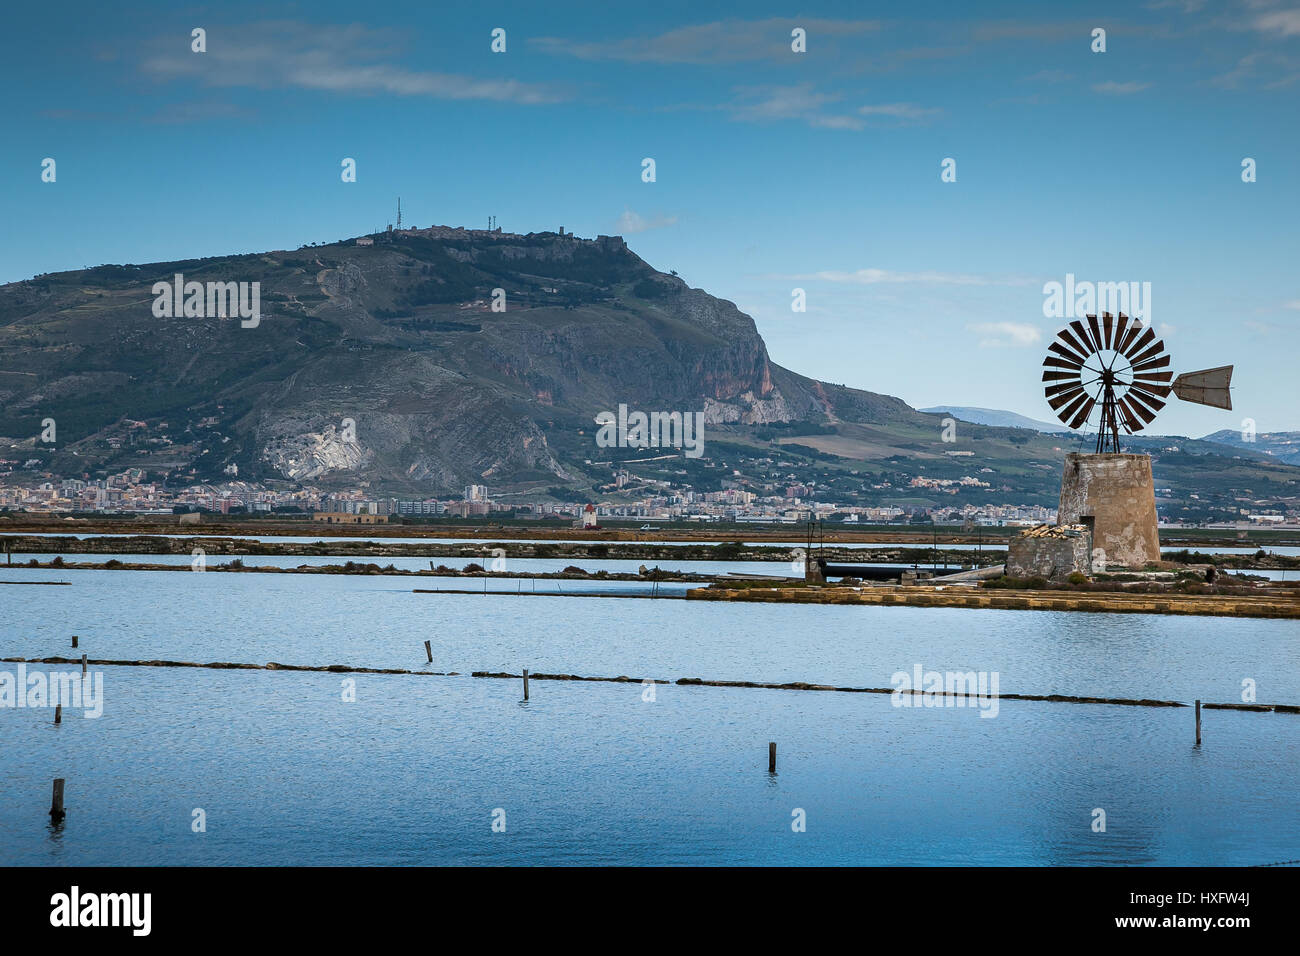 Marsala, Sicily, Italy (province of Trapani) - old windmill and saltwork Stock Photo